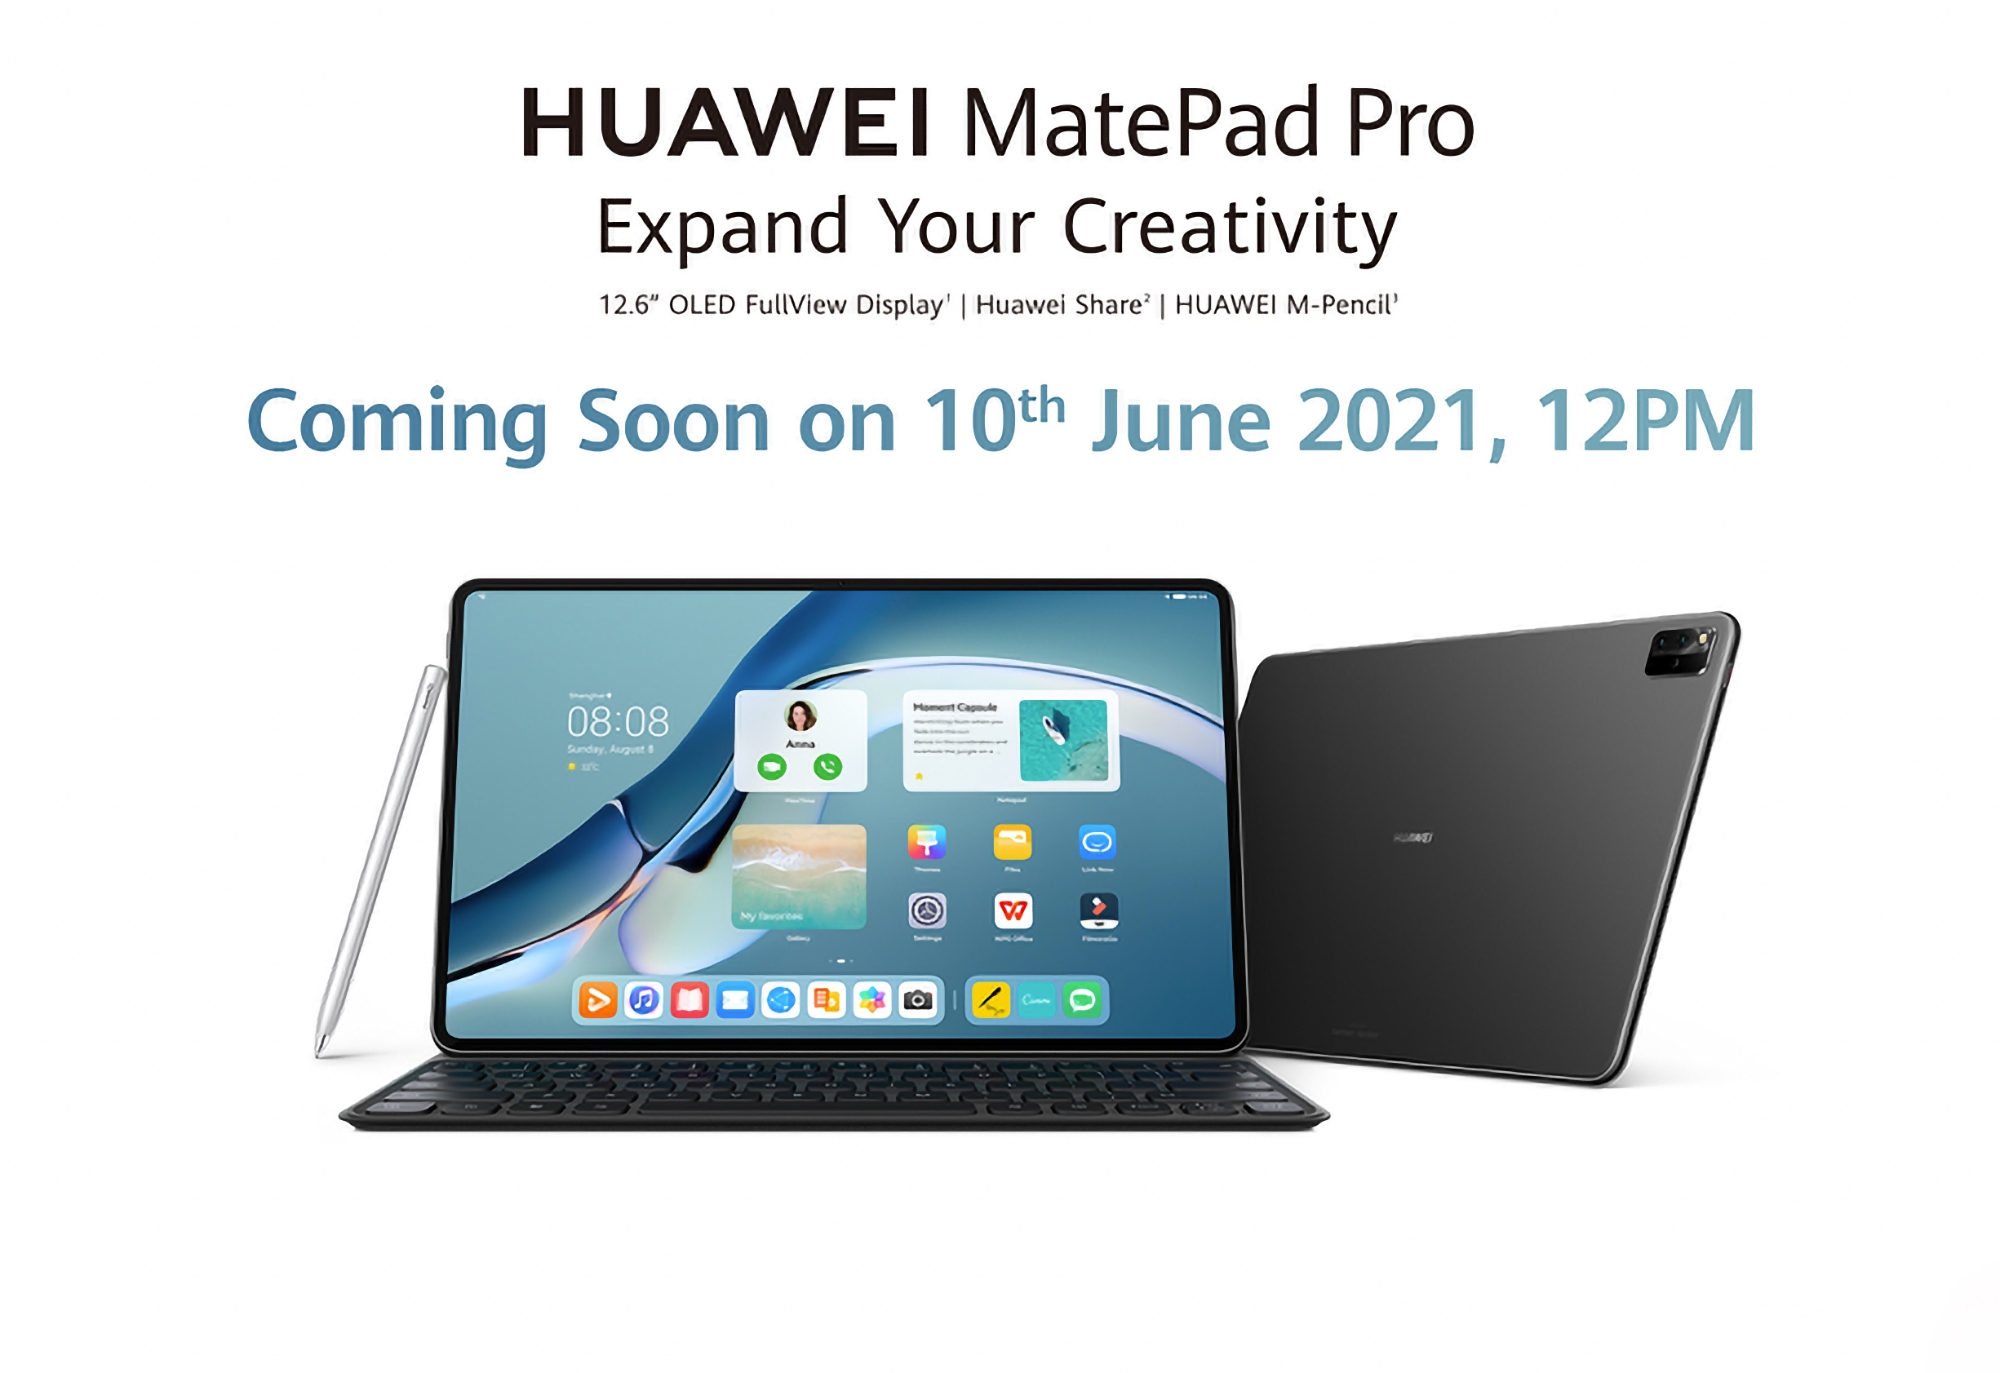 Huawei MatePad Pro 12.6 with Harmony OS enters the global market on June 10